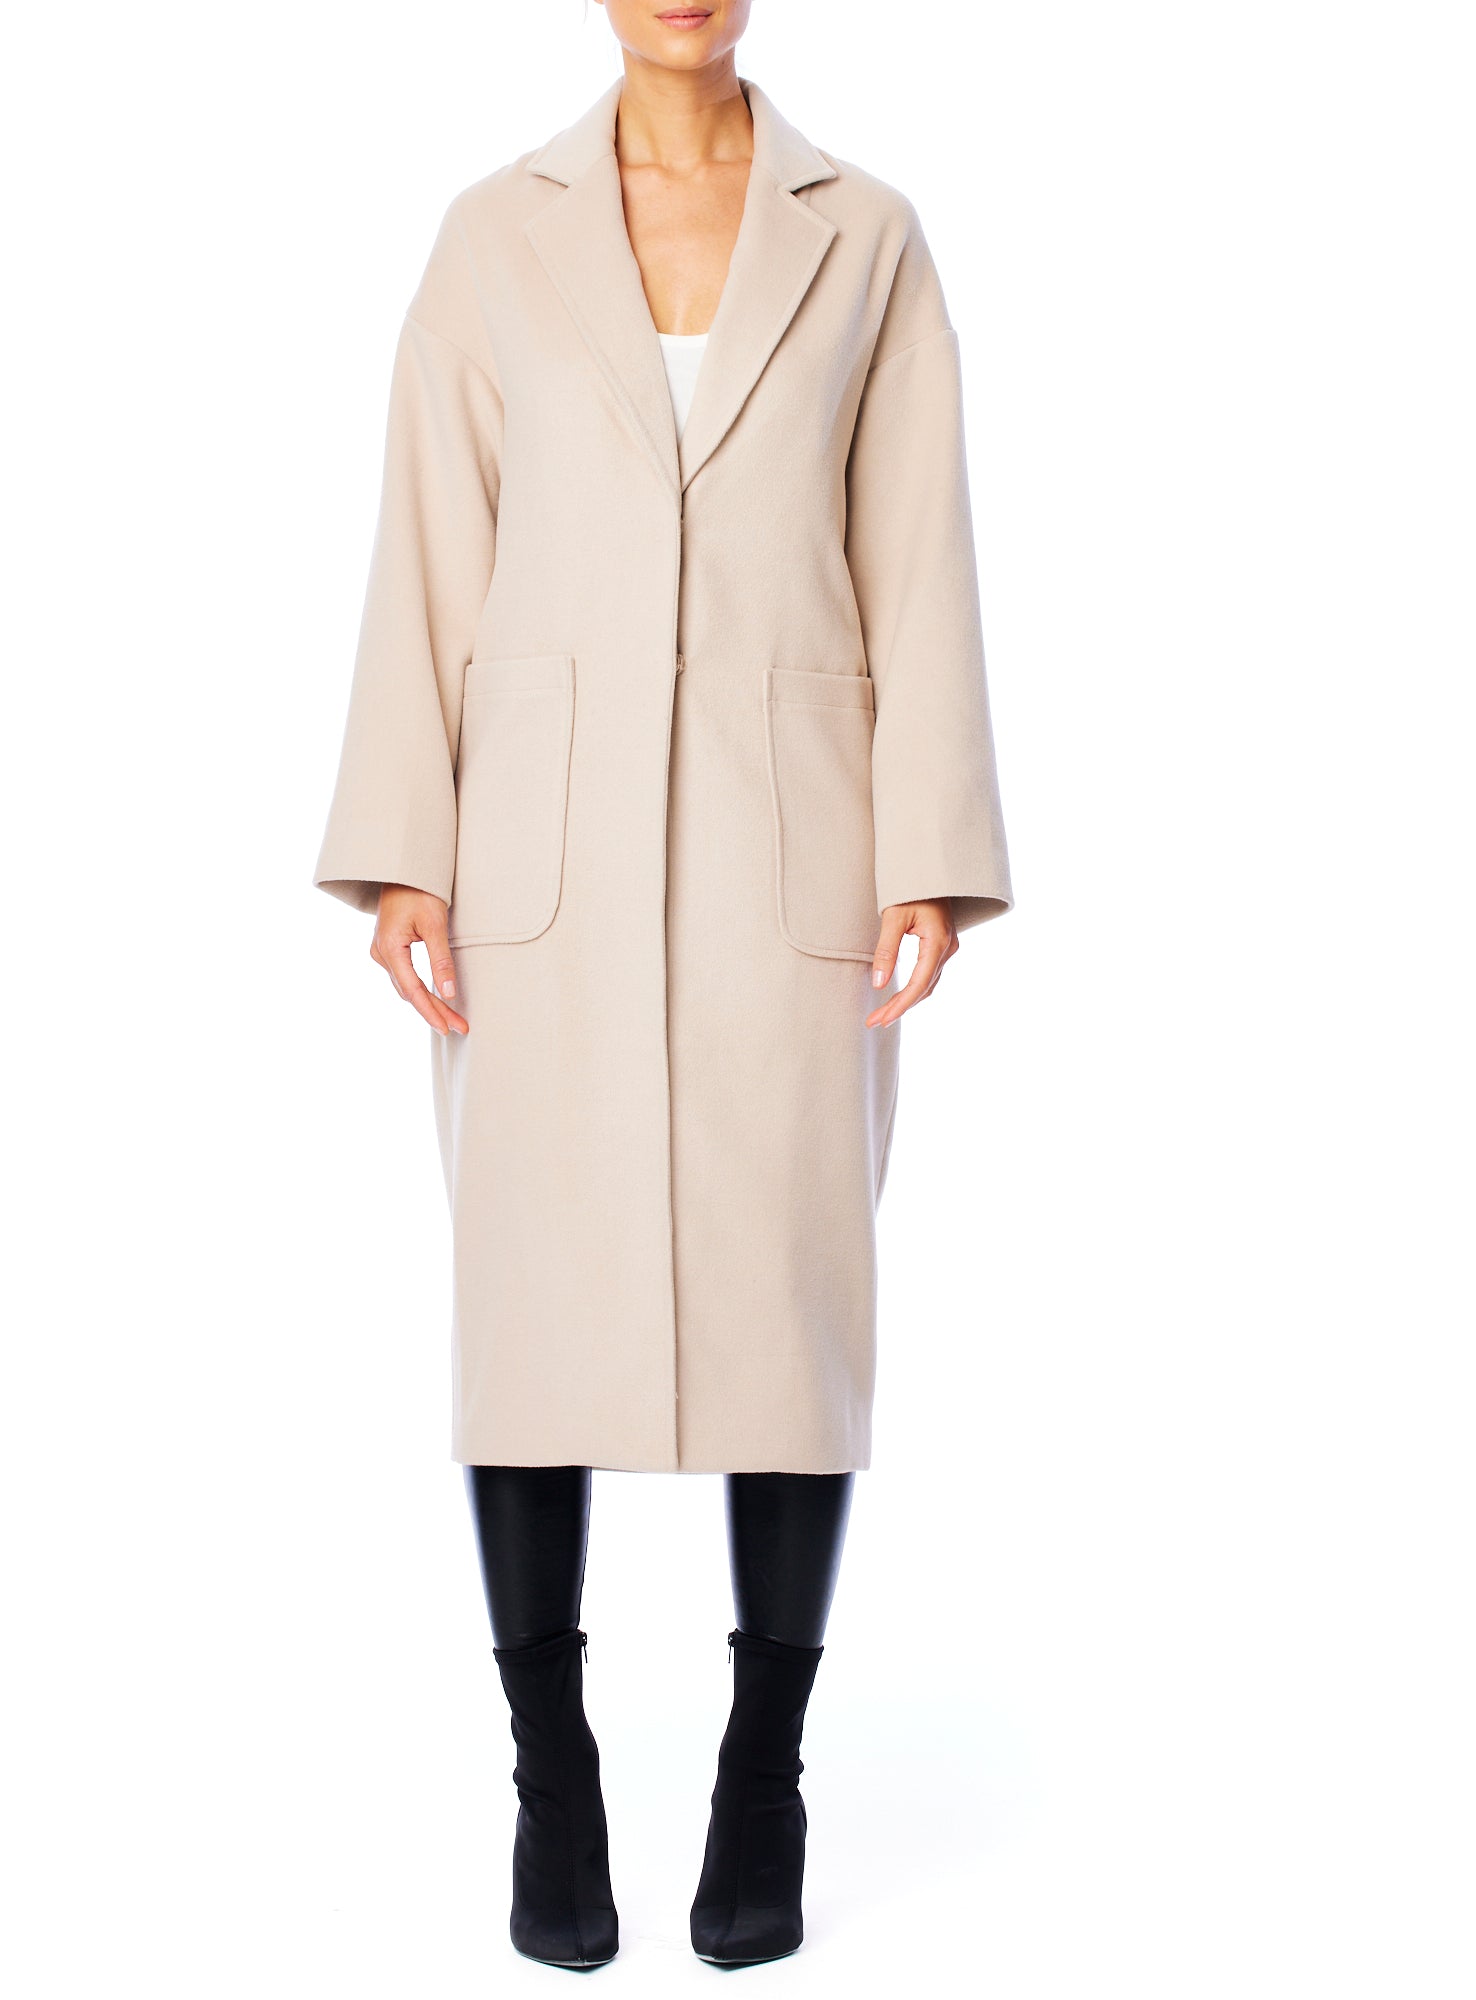 Clifton midi length jacket featuring hidden snap closure and front pockets